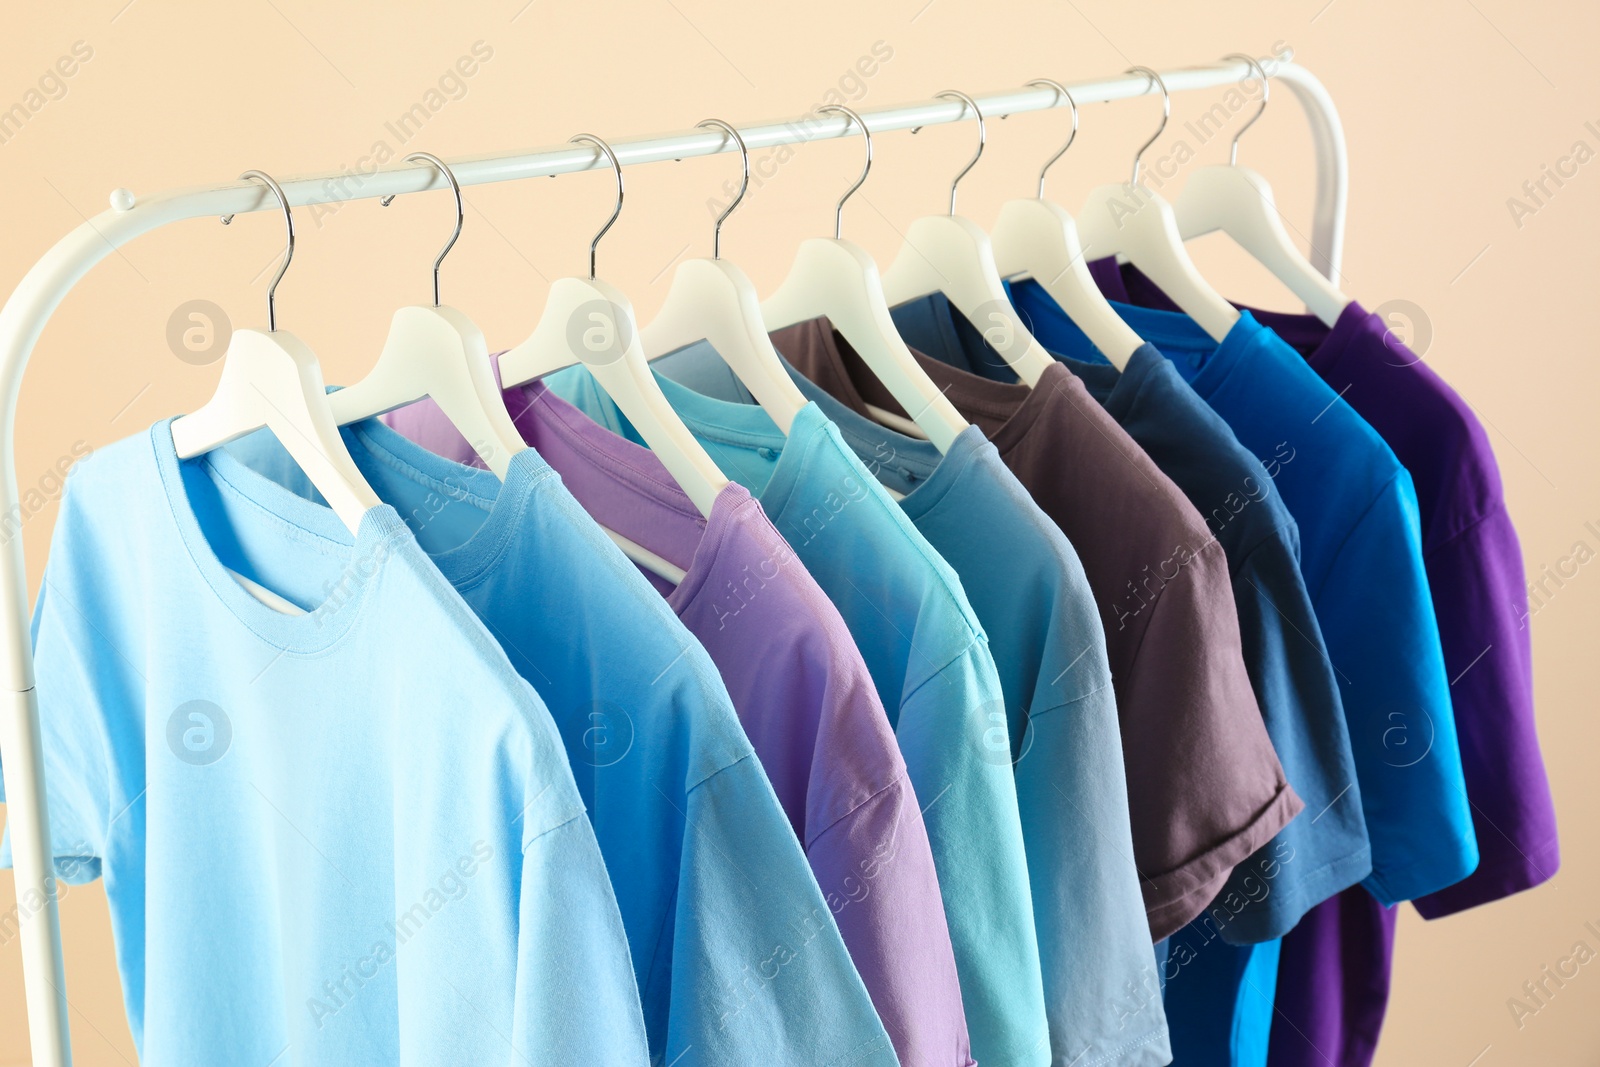 Photo of Men's clothes hanging on wardrobe rack against light background